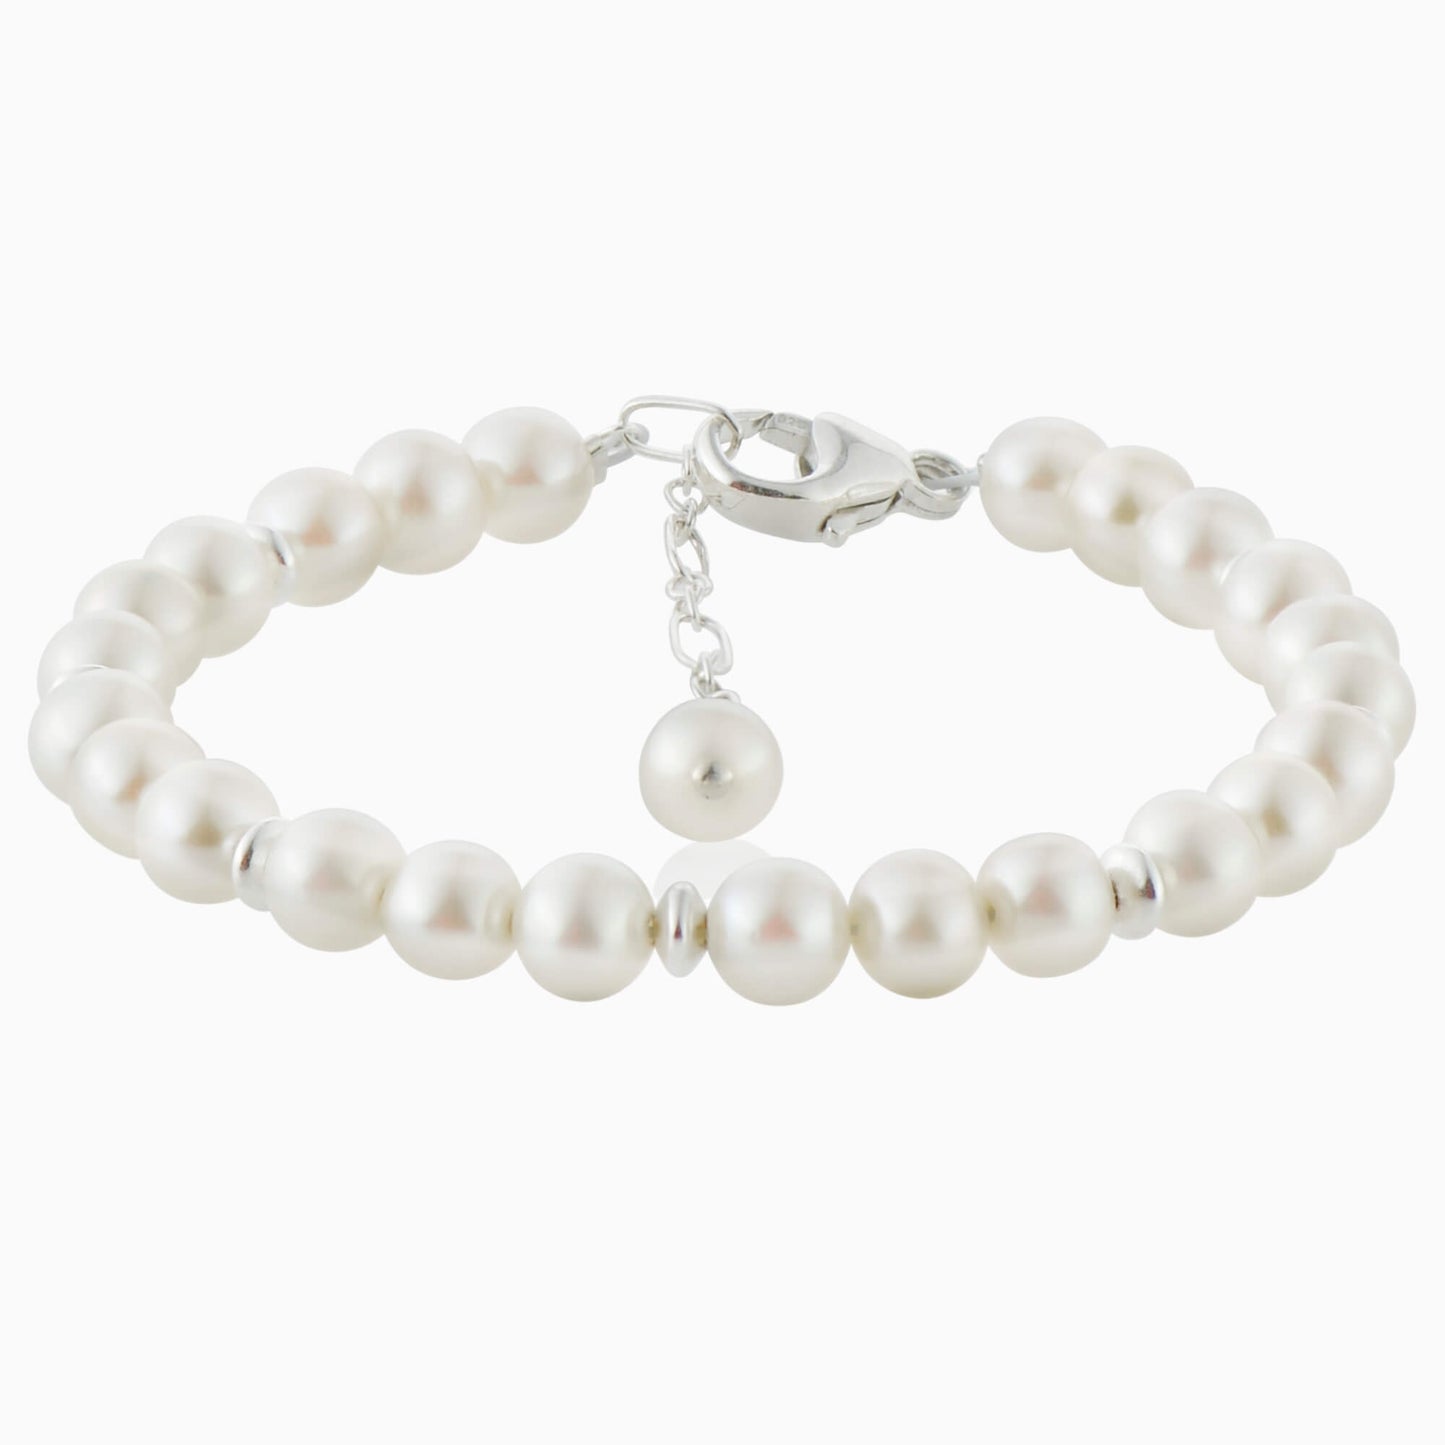 Lovely Pearl and Sterling Silver Bracelet